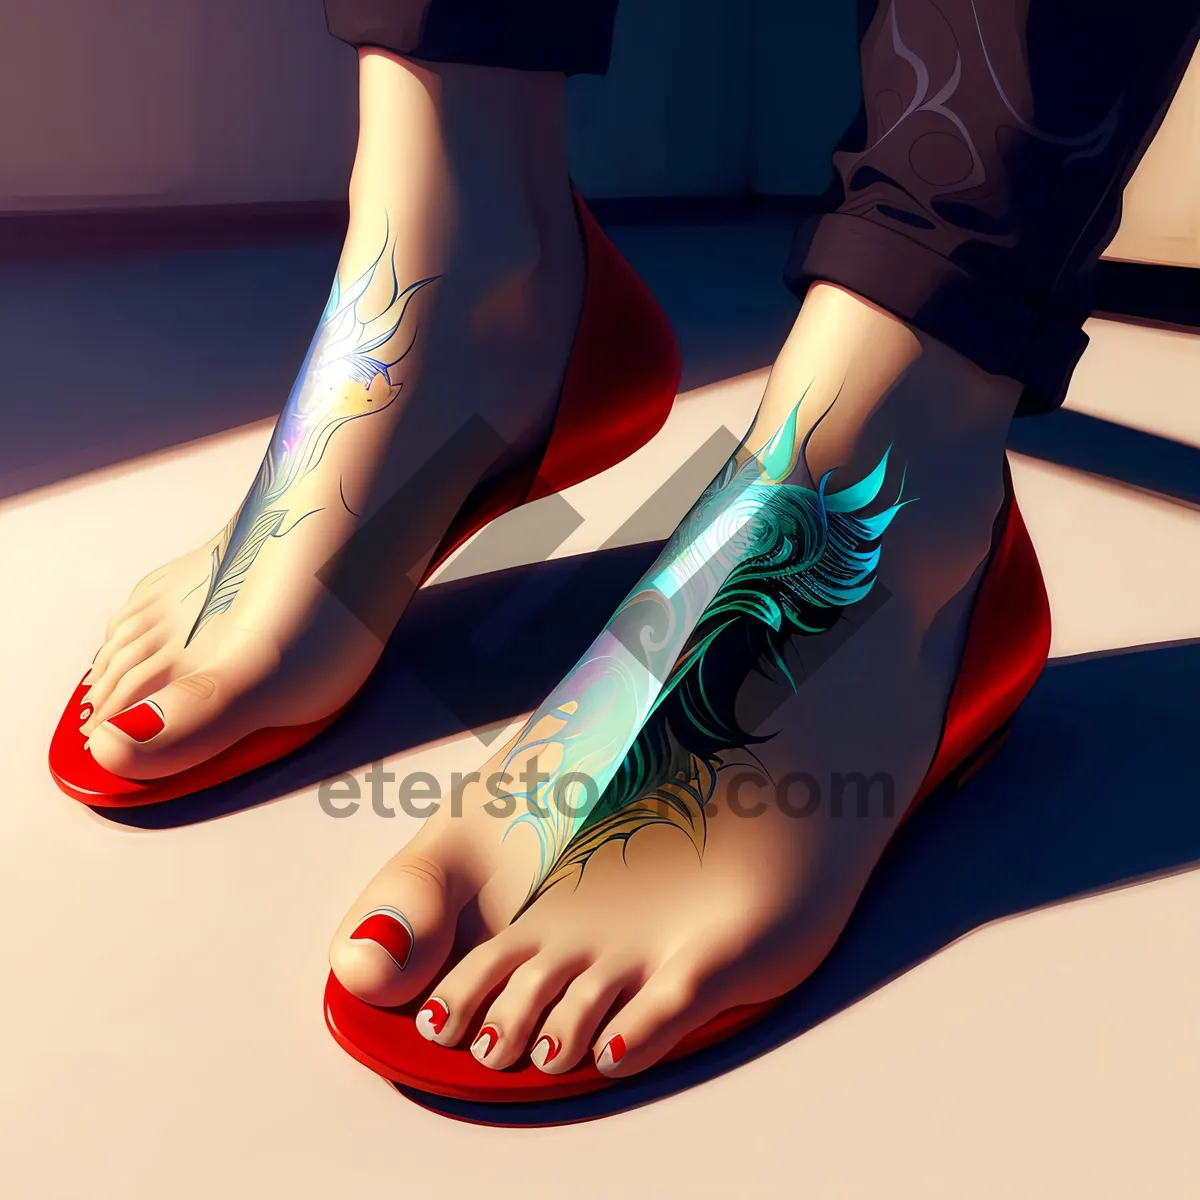 Picture of Seductive legs adorned in fashionable footwear